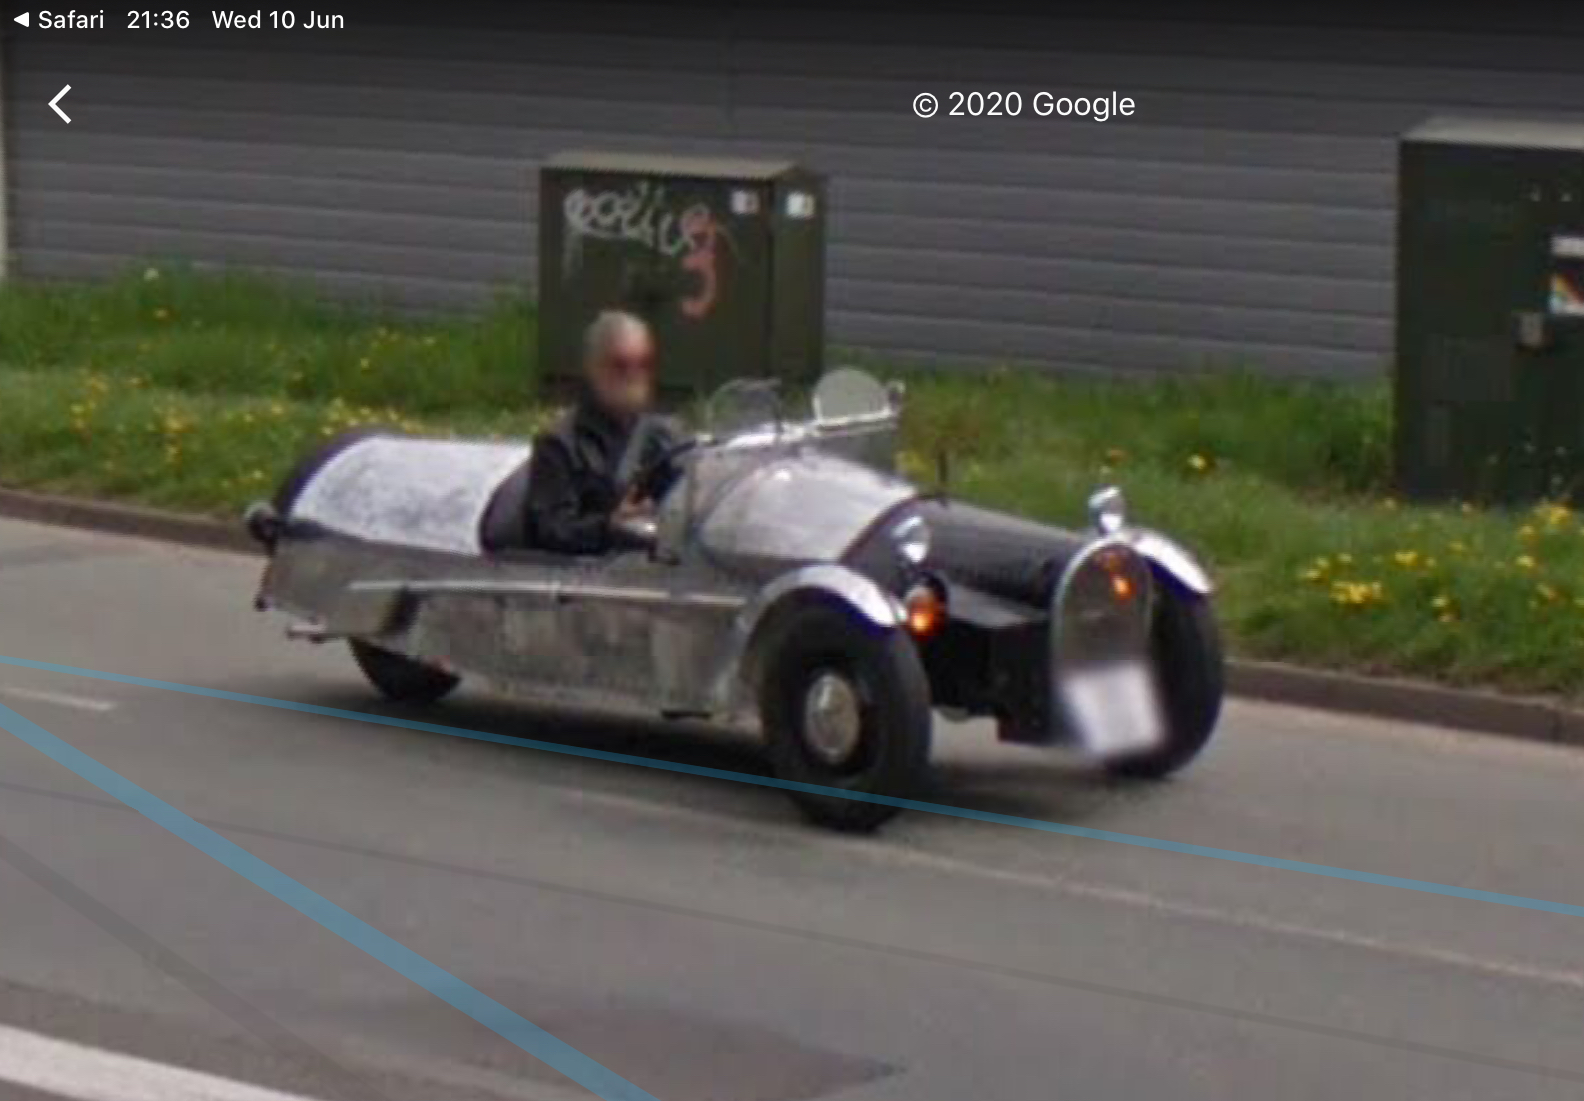 Strange car on Streetview  - Page 1 - Classic Cars and Yesterday's Heroes - PistonHeads